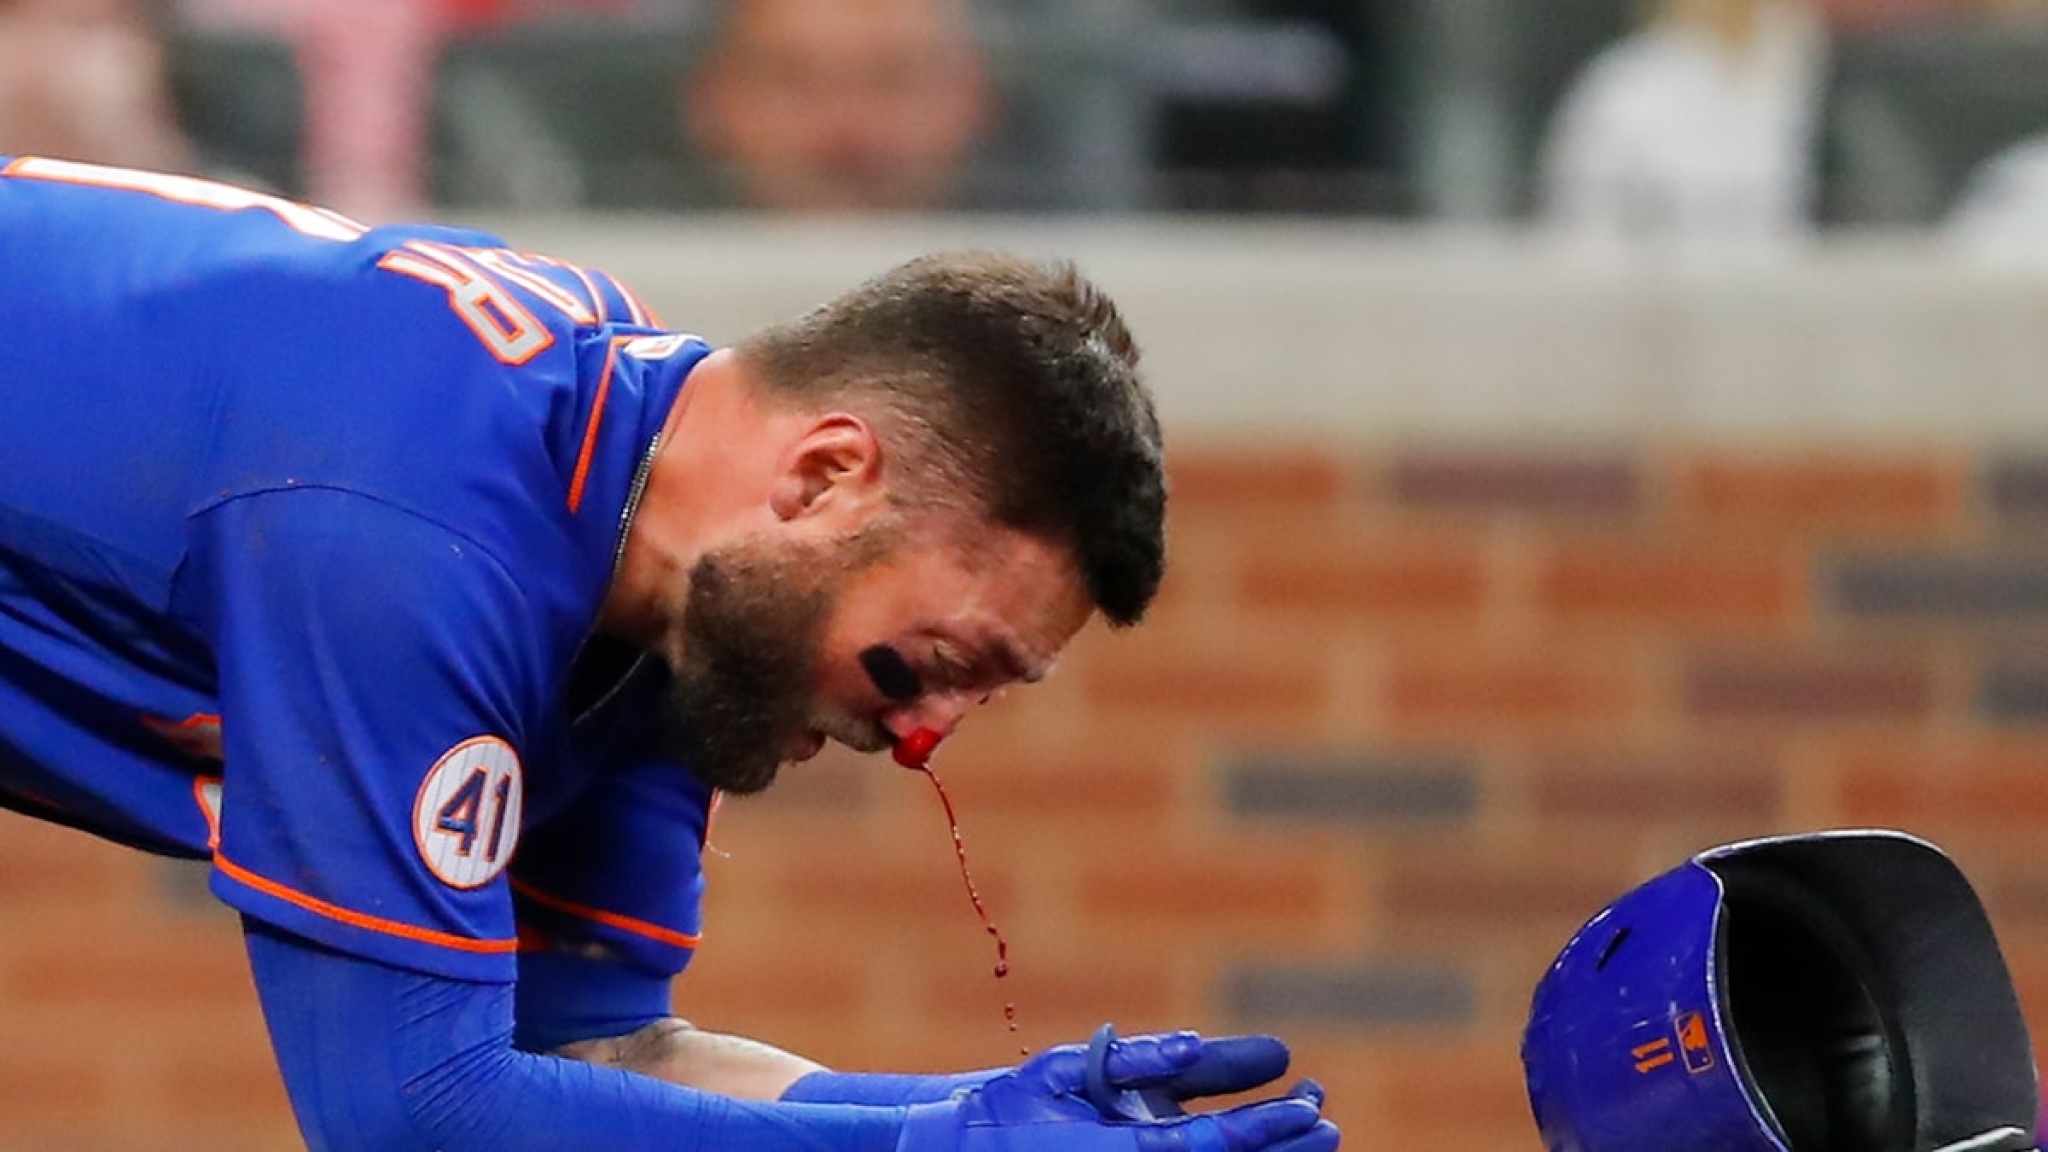 MLB’s Kevin Pillar Shows Wounded Face After Being Drilled In Face By 94-MPH Fastball